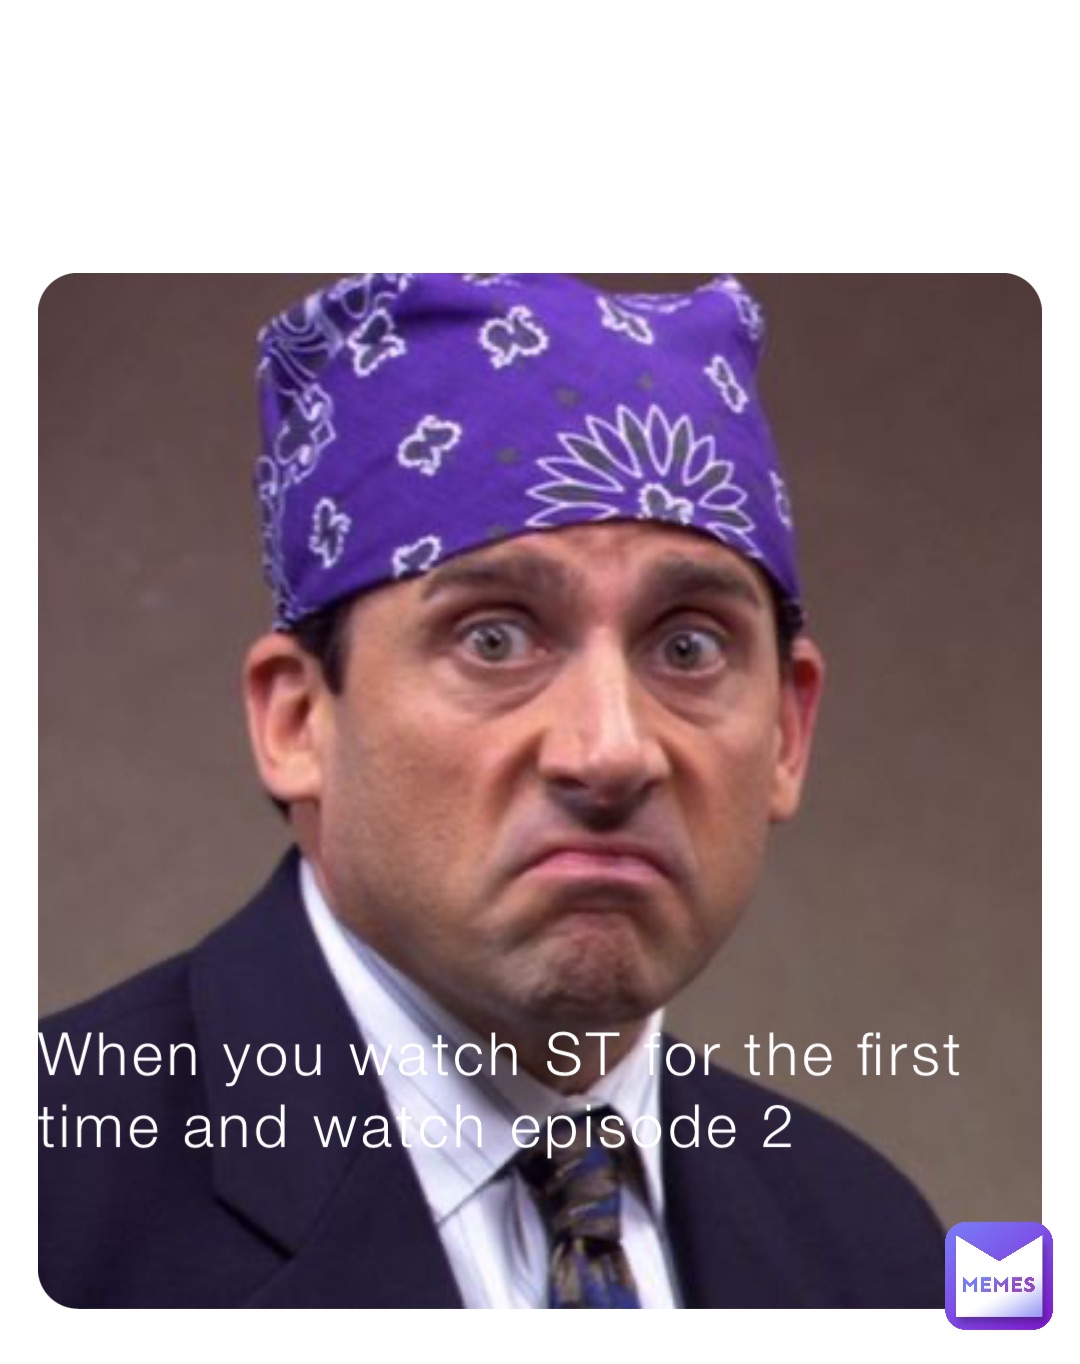 When you watch ST for the first time and watch episode 2